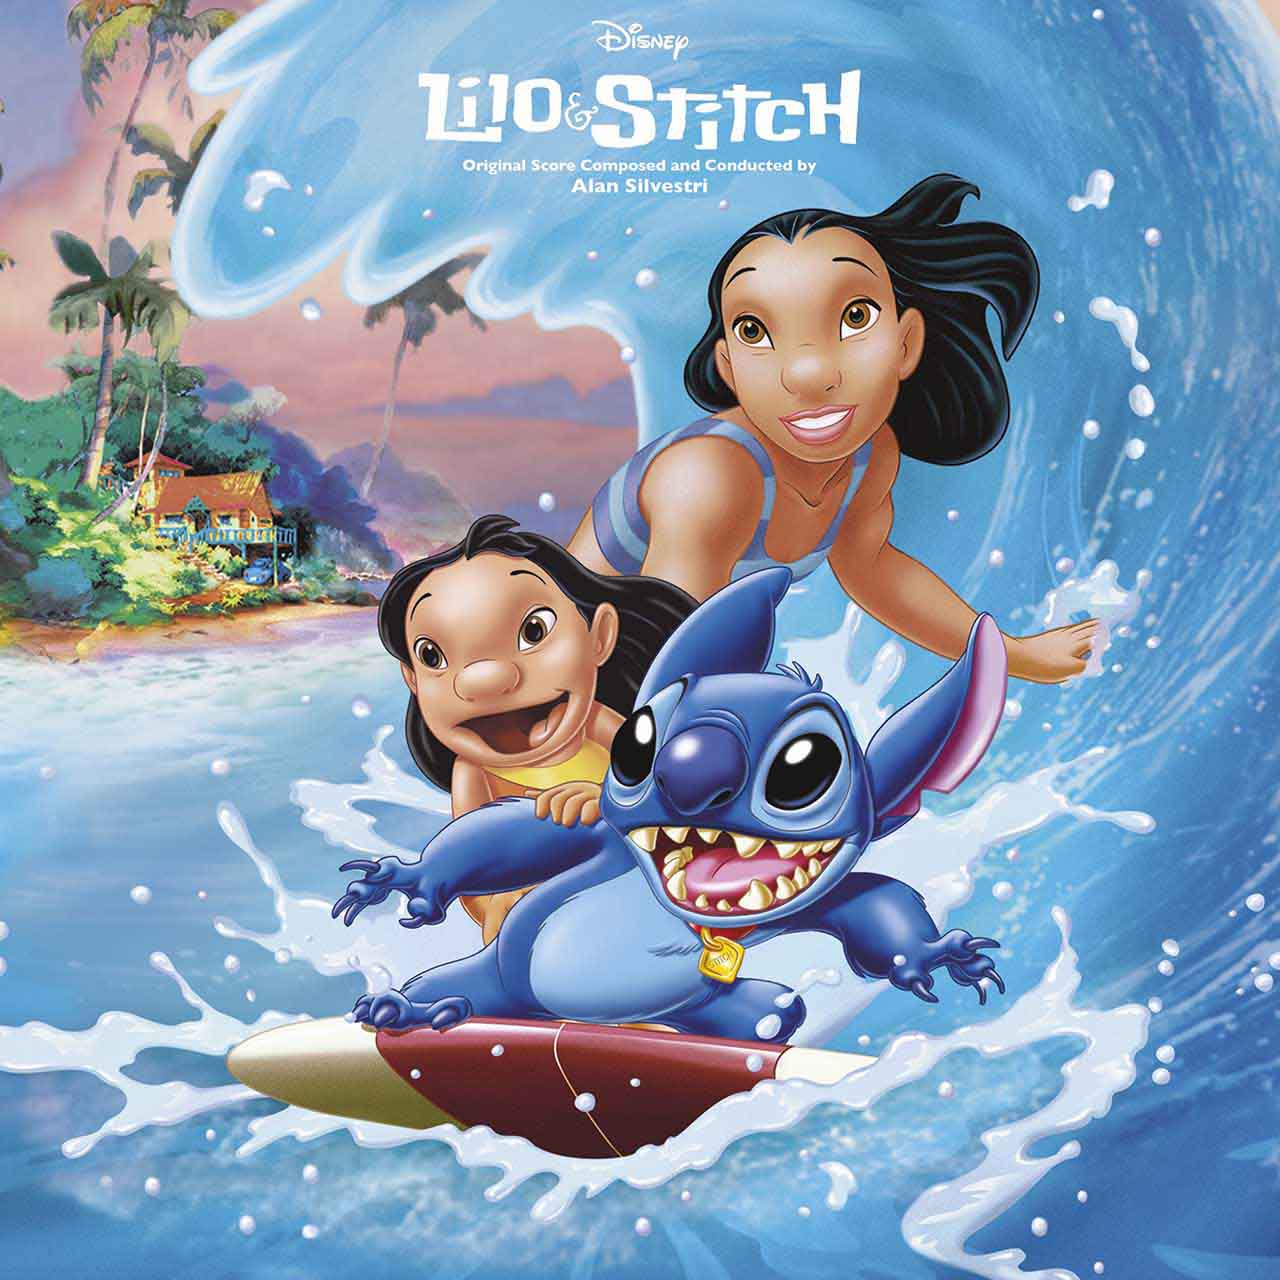 How Disney’s ‘Lilo & Stitch’ Defied The Odds To Become A Hit